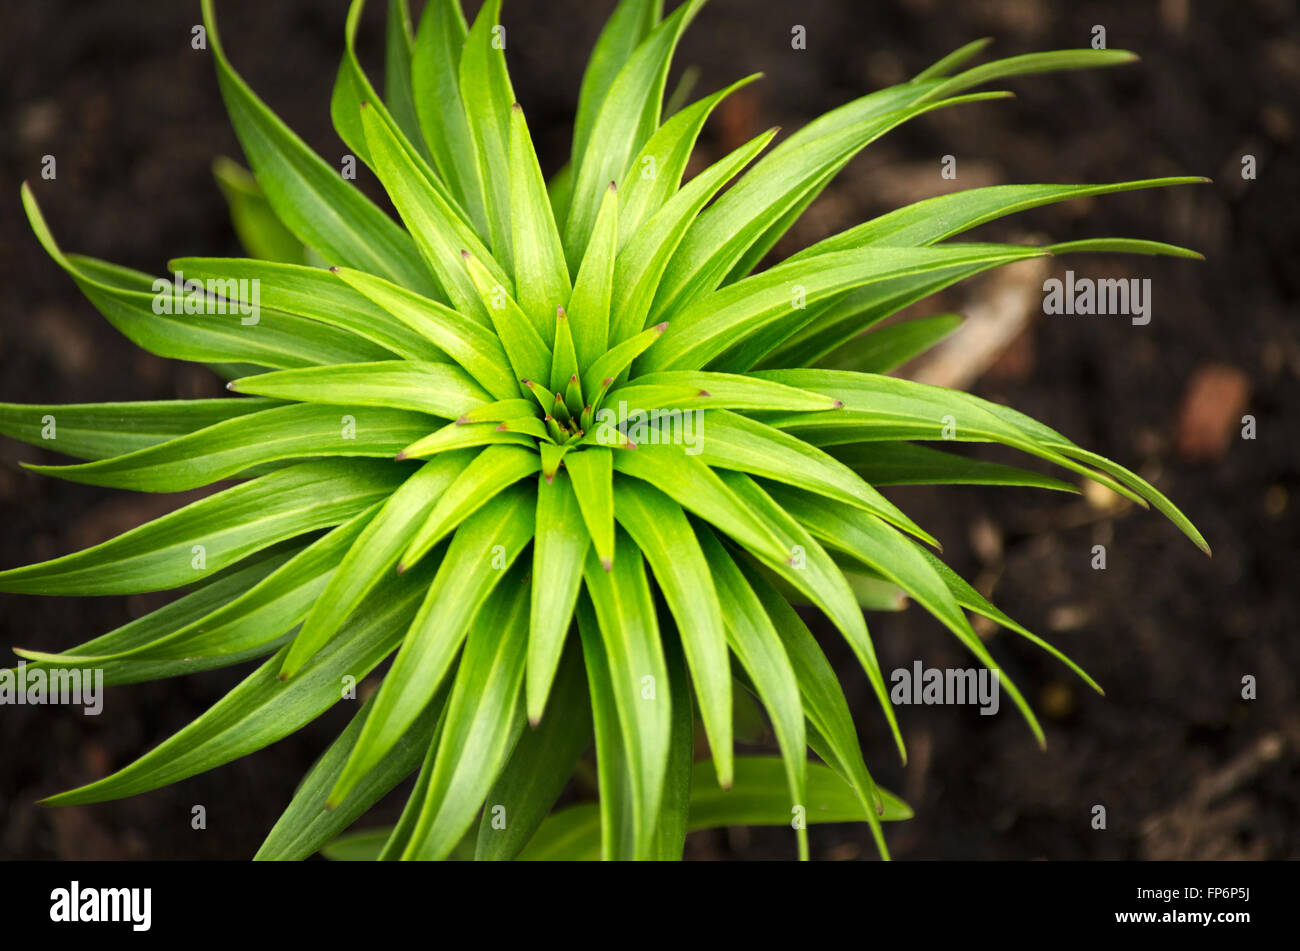 Green plant spiral nature abstract. Stock Photo